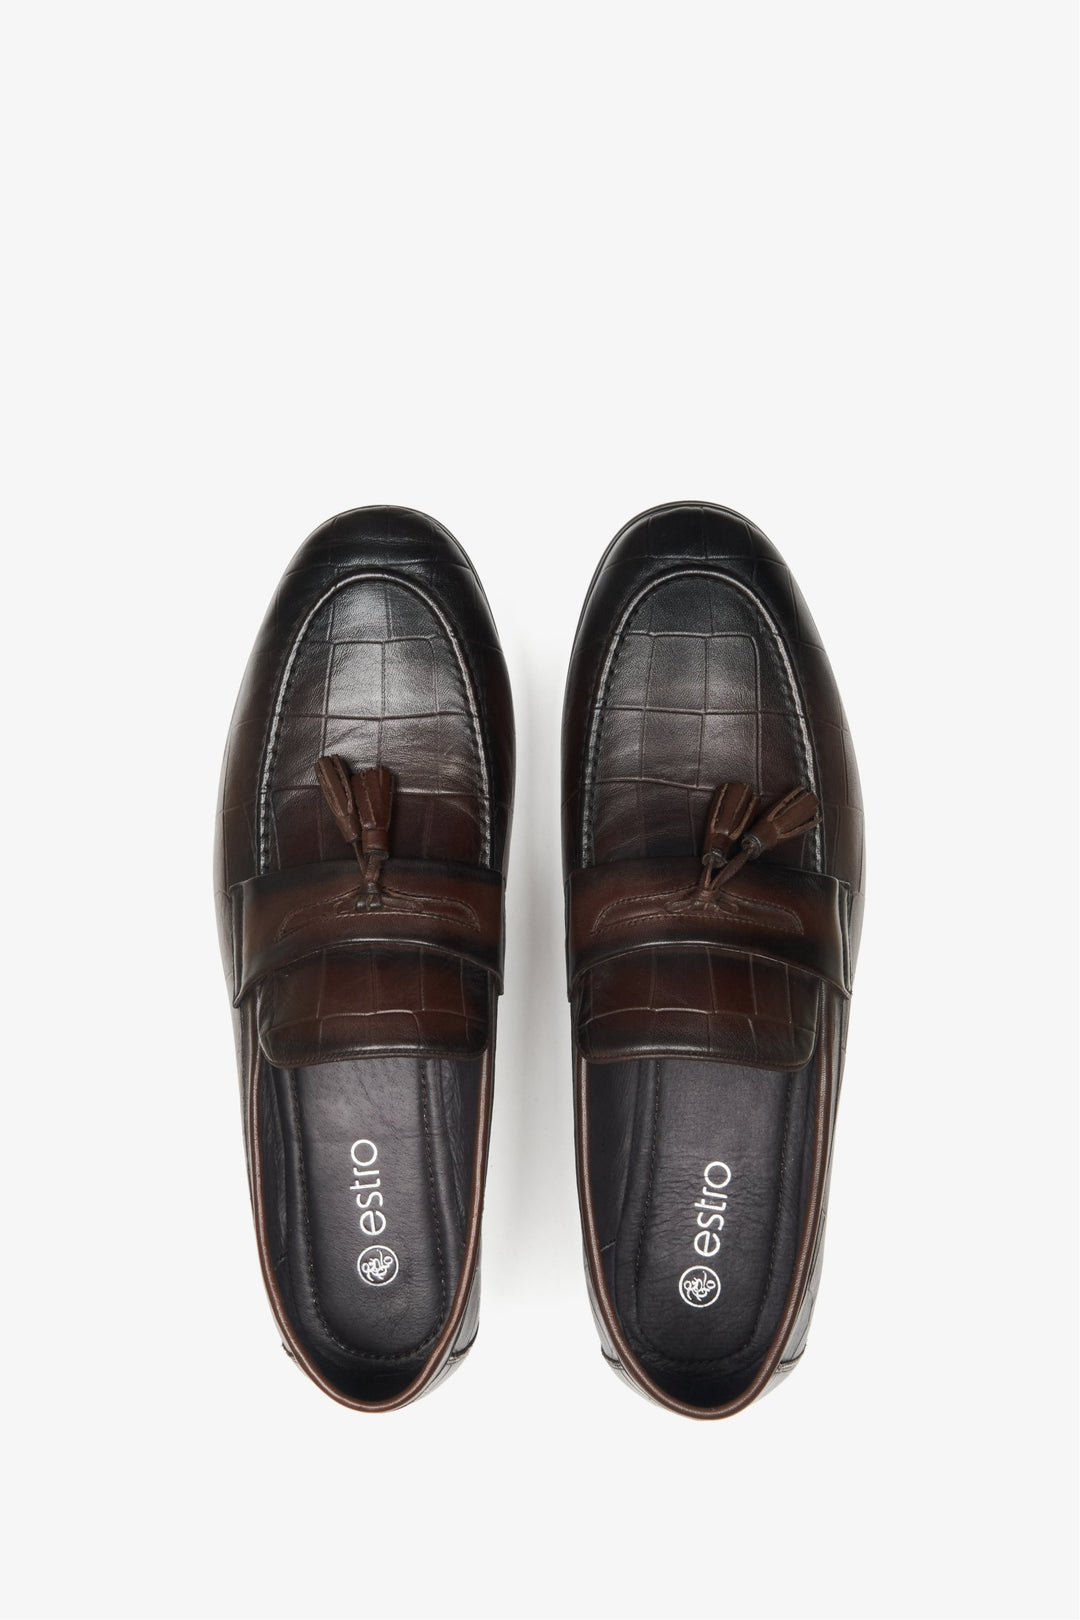 Men's dark brown leather loafers for spring by Estro - top view close-up of the footwear.